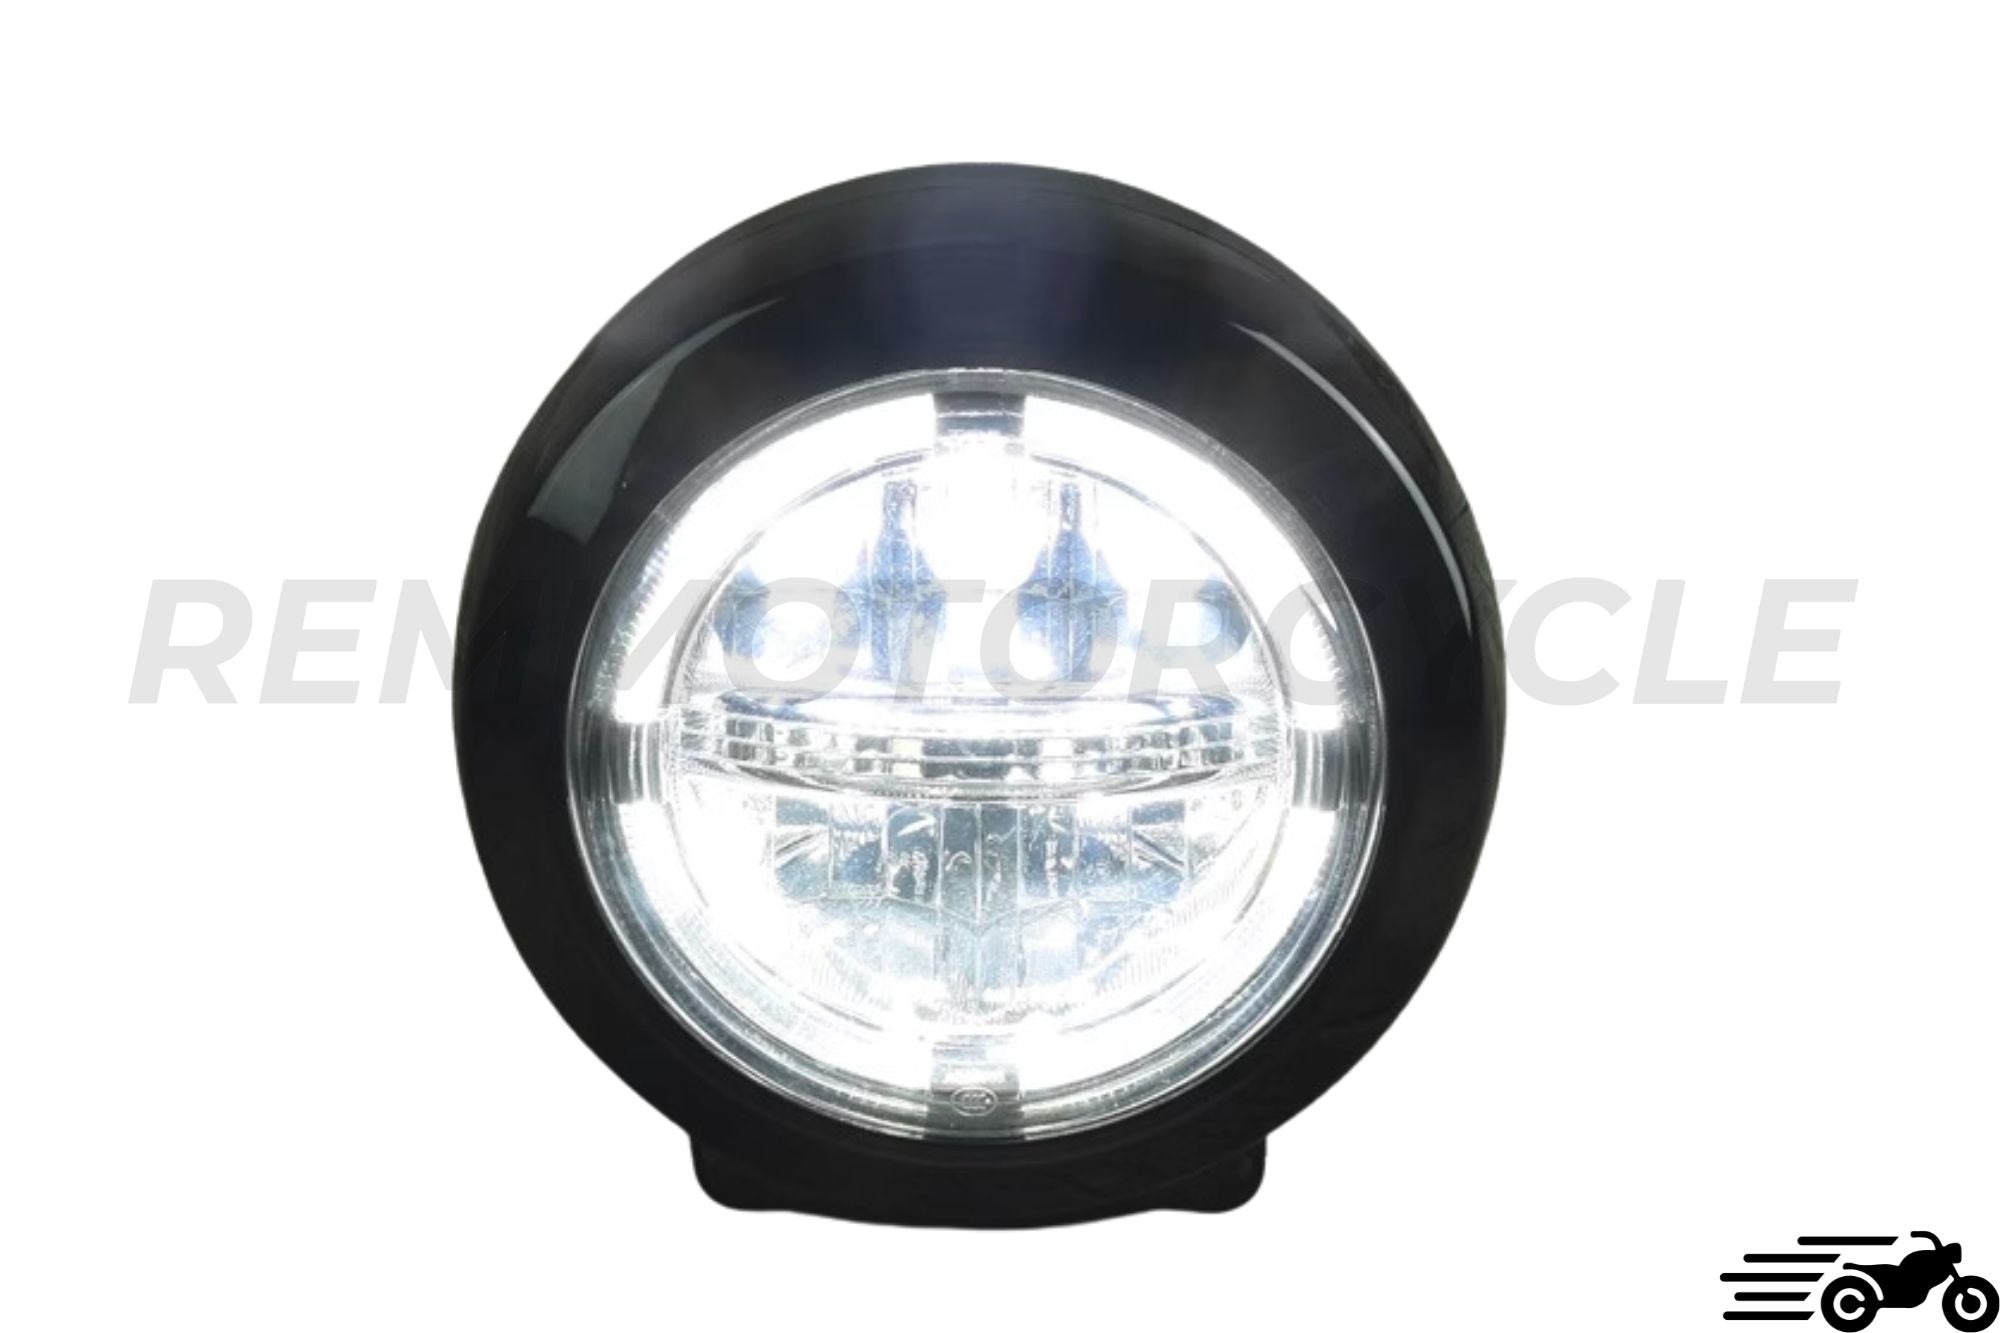 Approved 7 inch LED motorcycle headlight